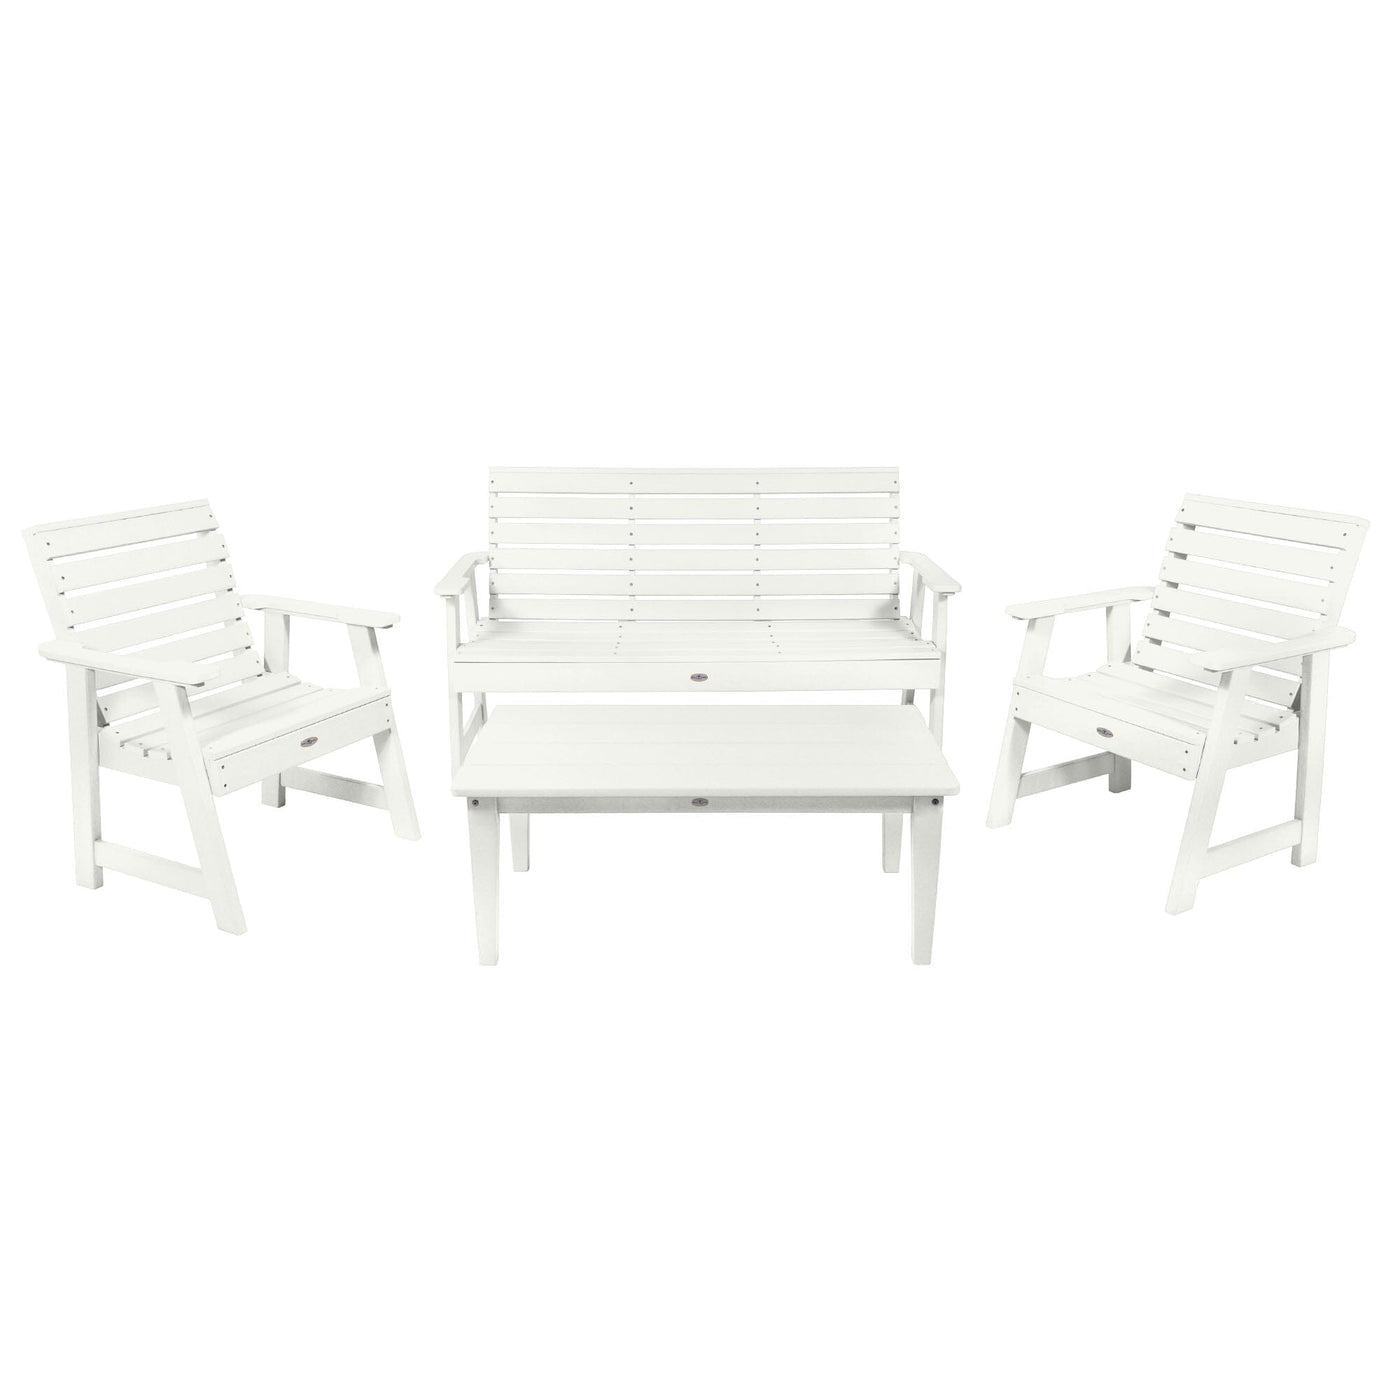 Riverside Garden Bench 5ft, 2 Garden Chairs and Conversation Table Set Kitted Set Bahia Verde Outdoors Coconut White 